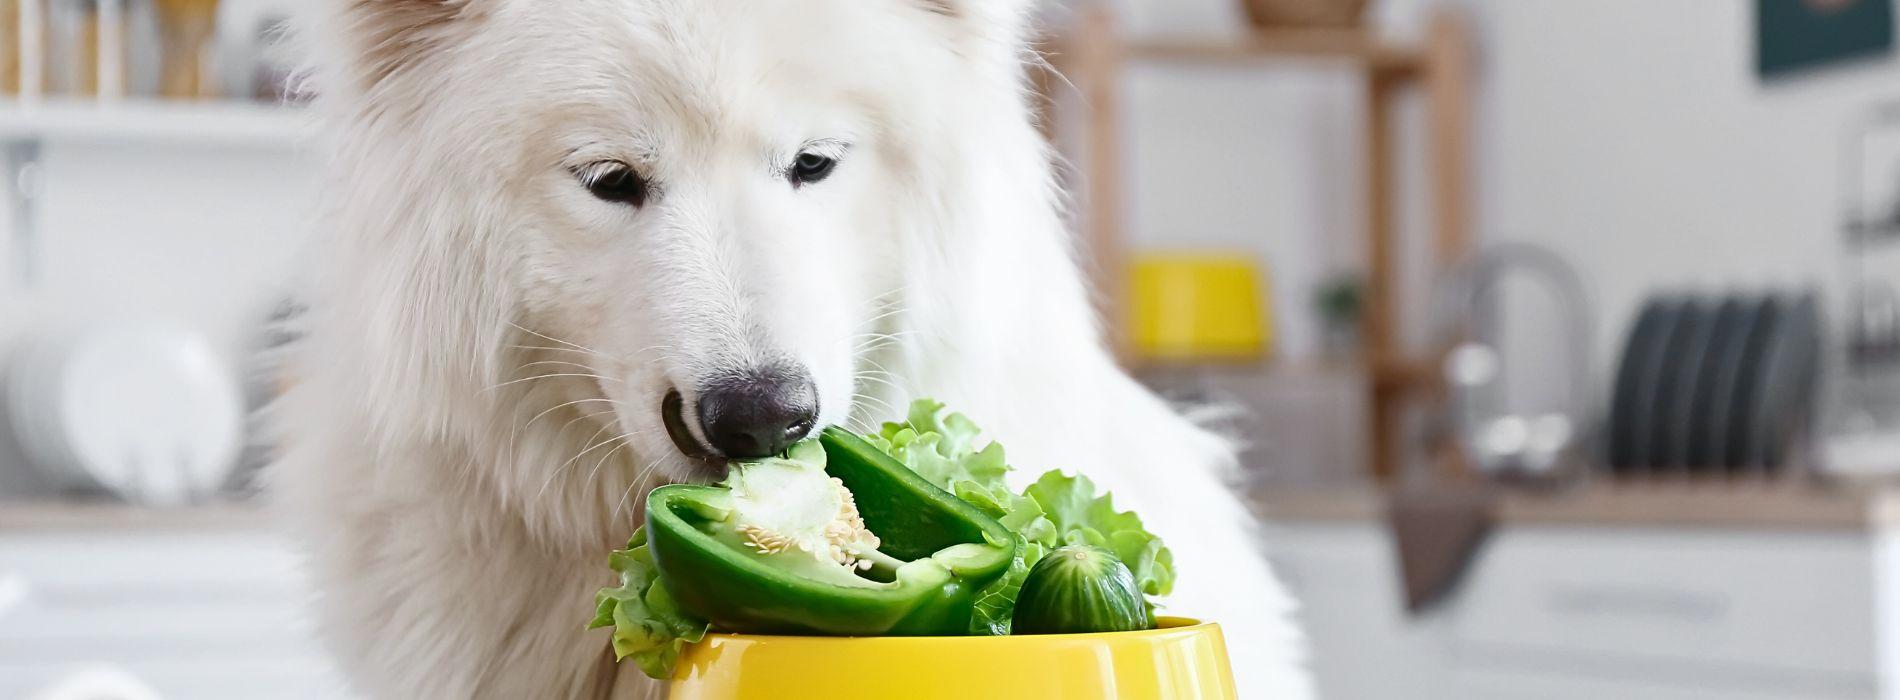 A white dog eats green peppers from a yellow bowl.